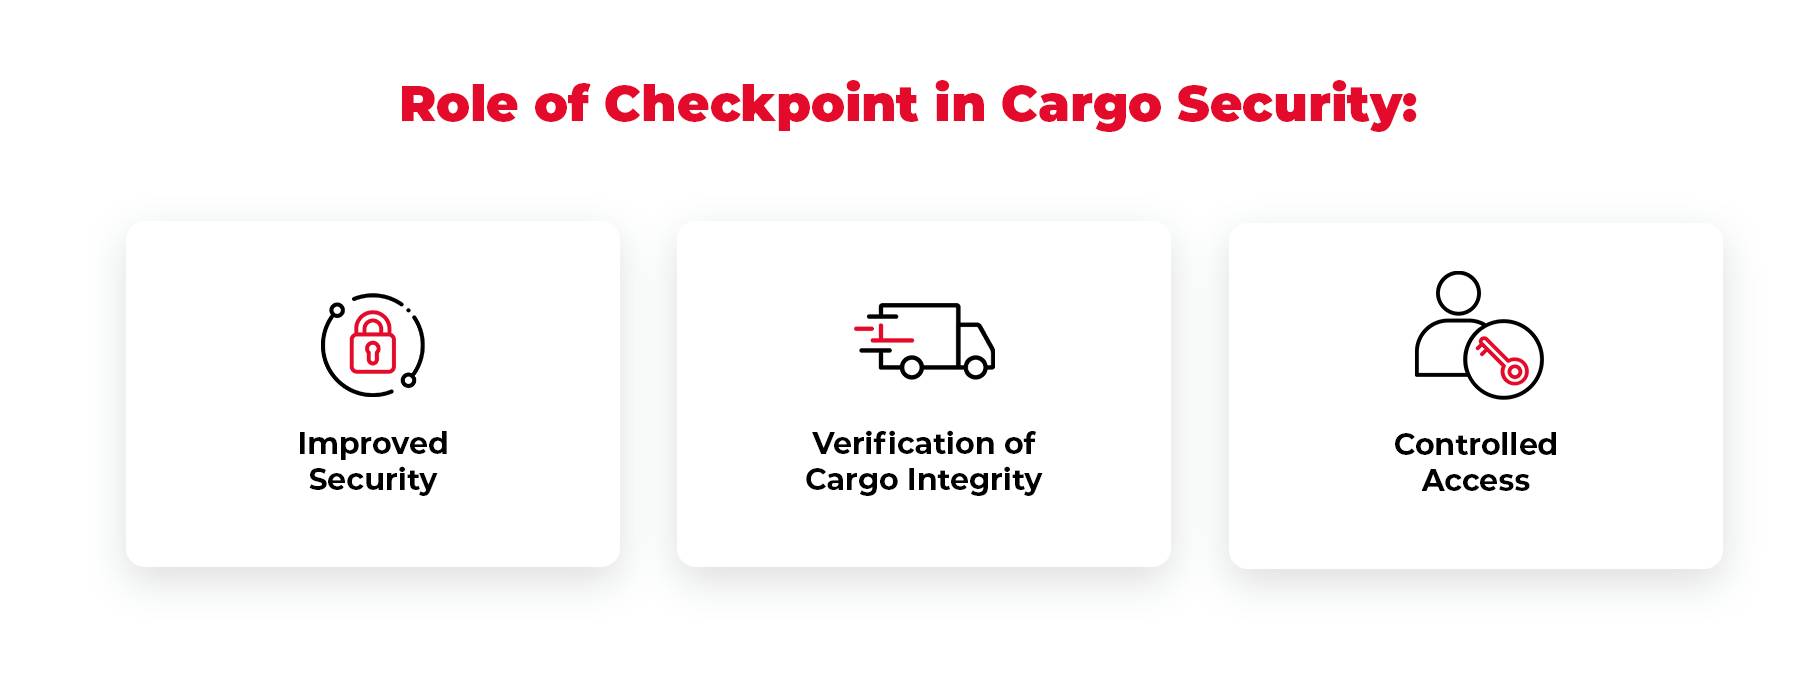 Role of checkpoints to improve cargo security